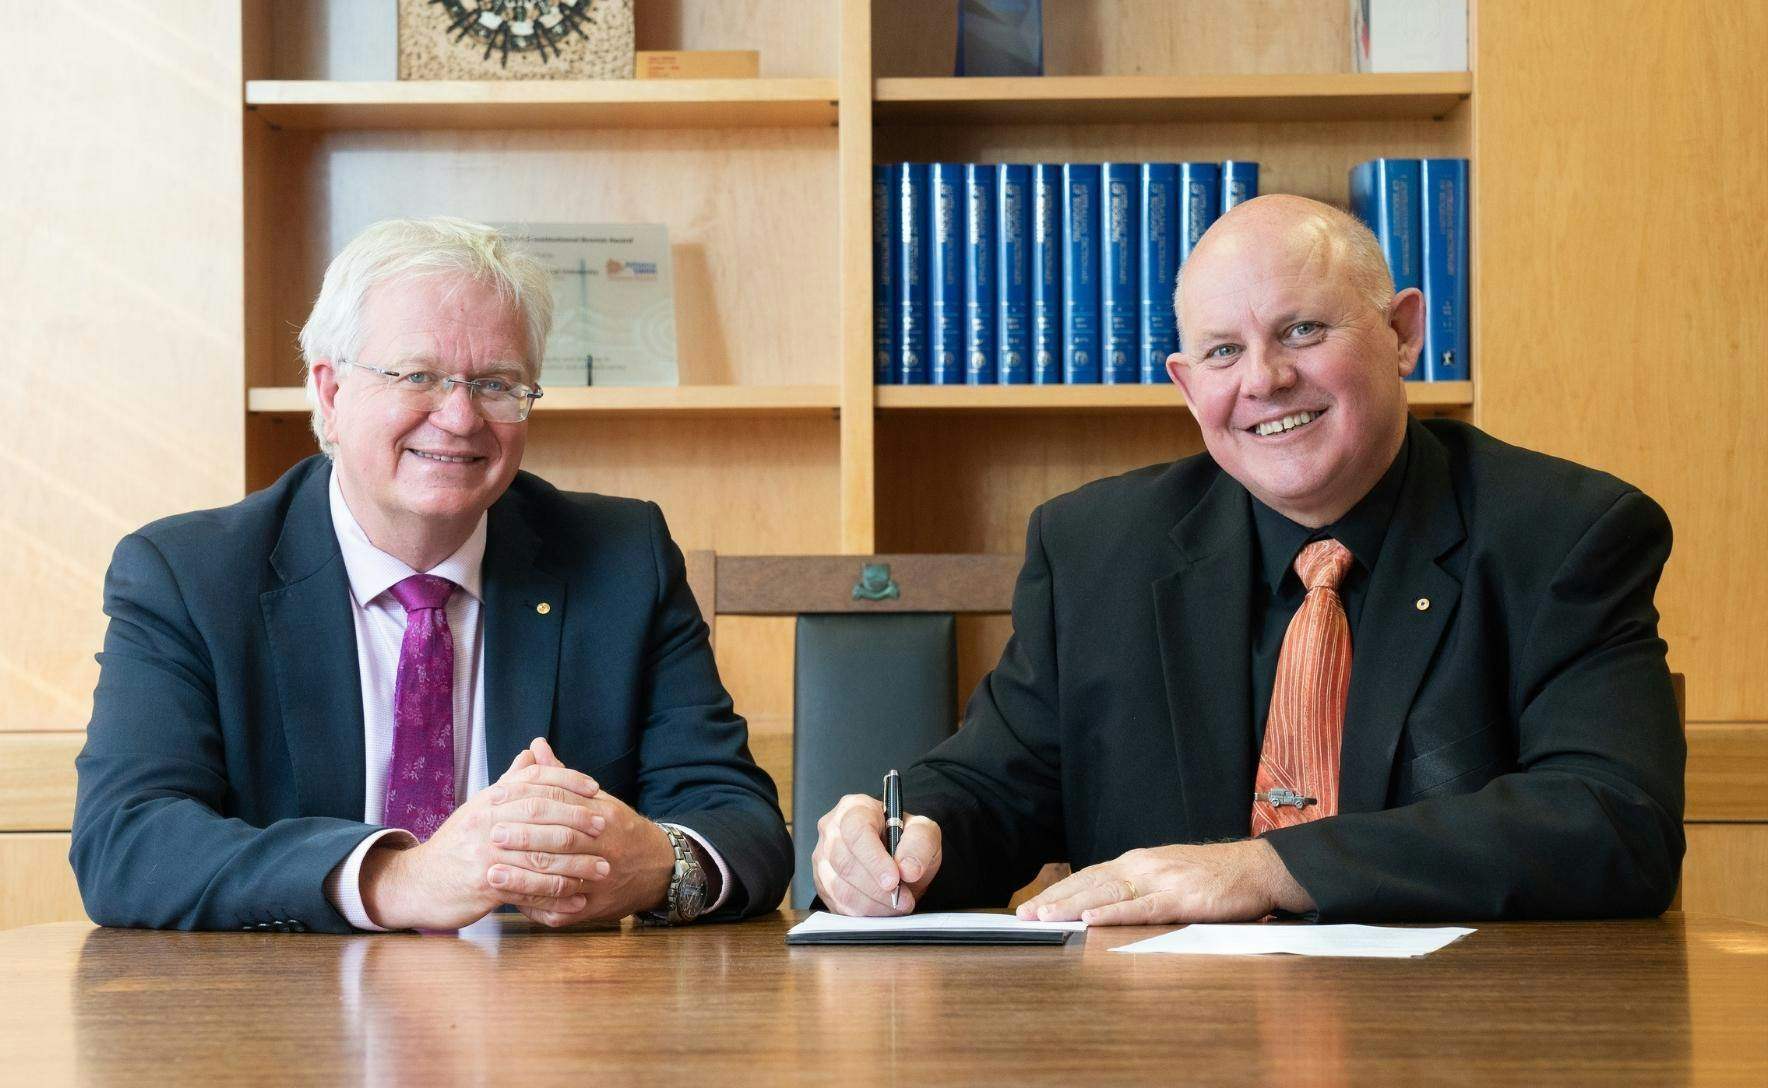 Professor Brian Schmidt and Professor Scott Bowman sit at a large table. Professor Bowman holds a pen in his right hand over a piece of white paper on the table.